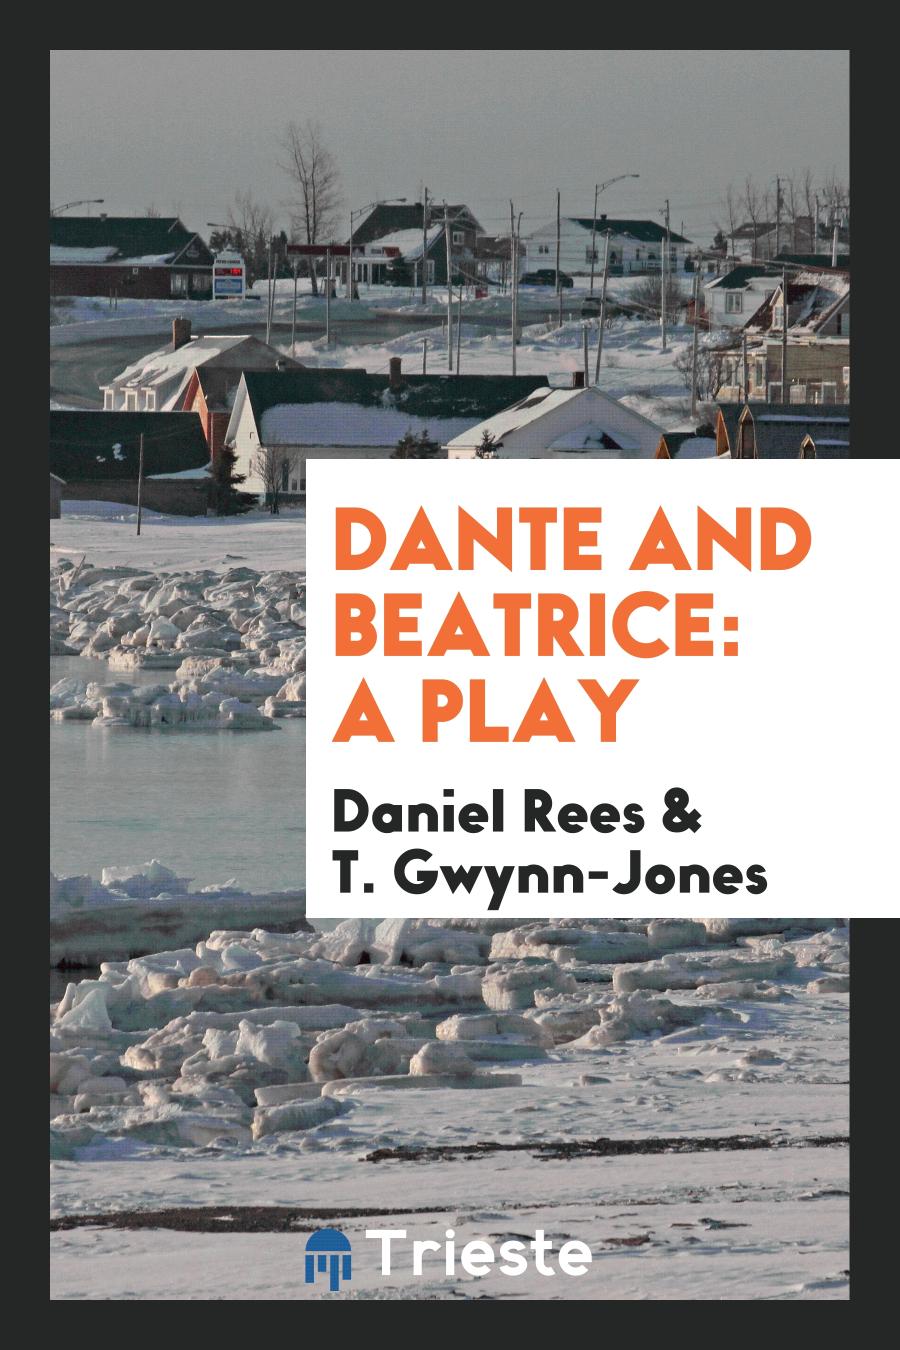 Dante and Beatrice: A Play